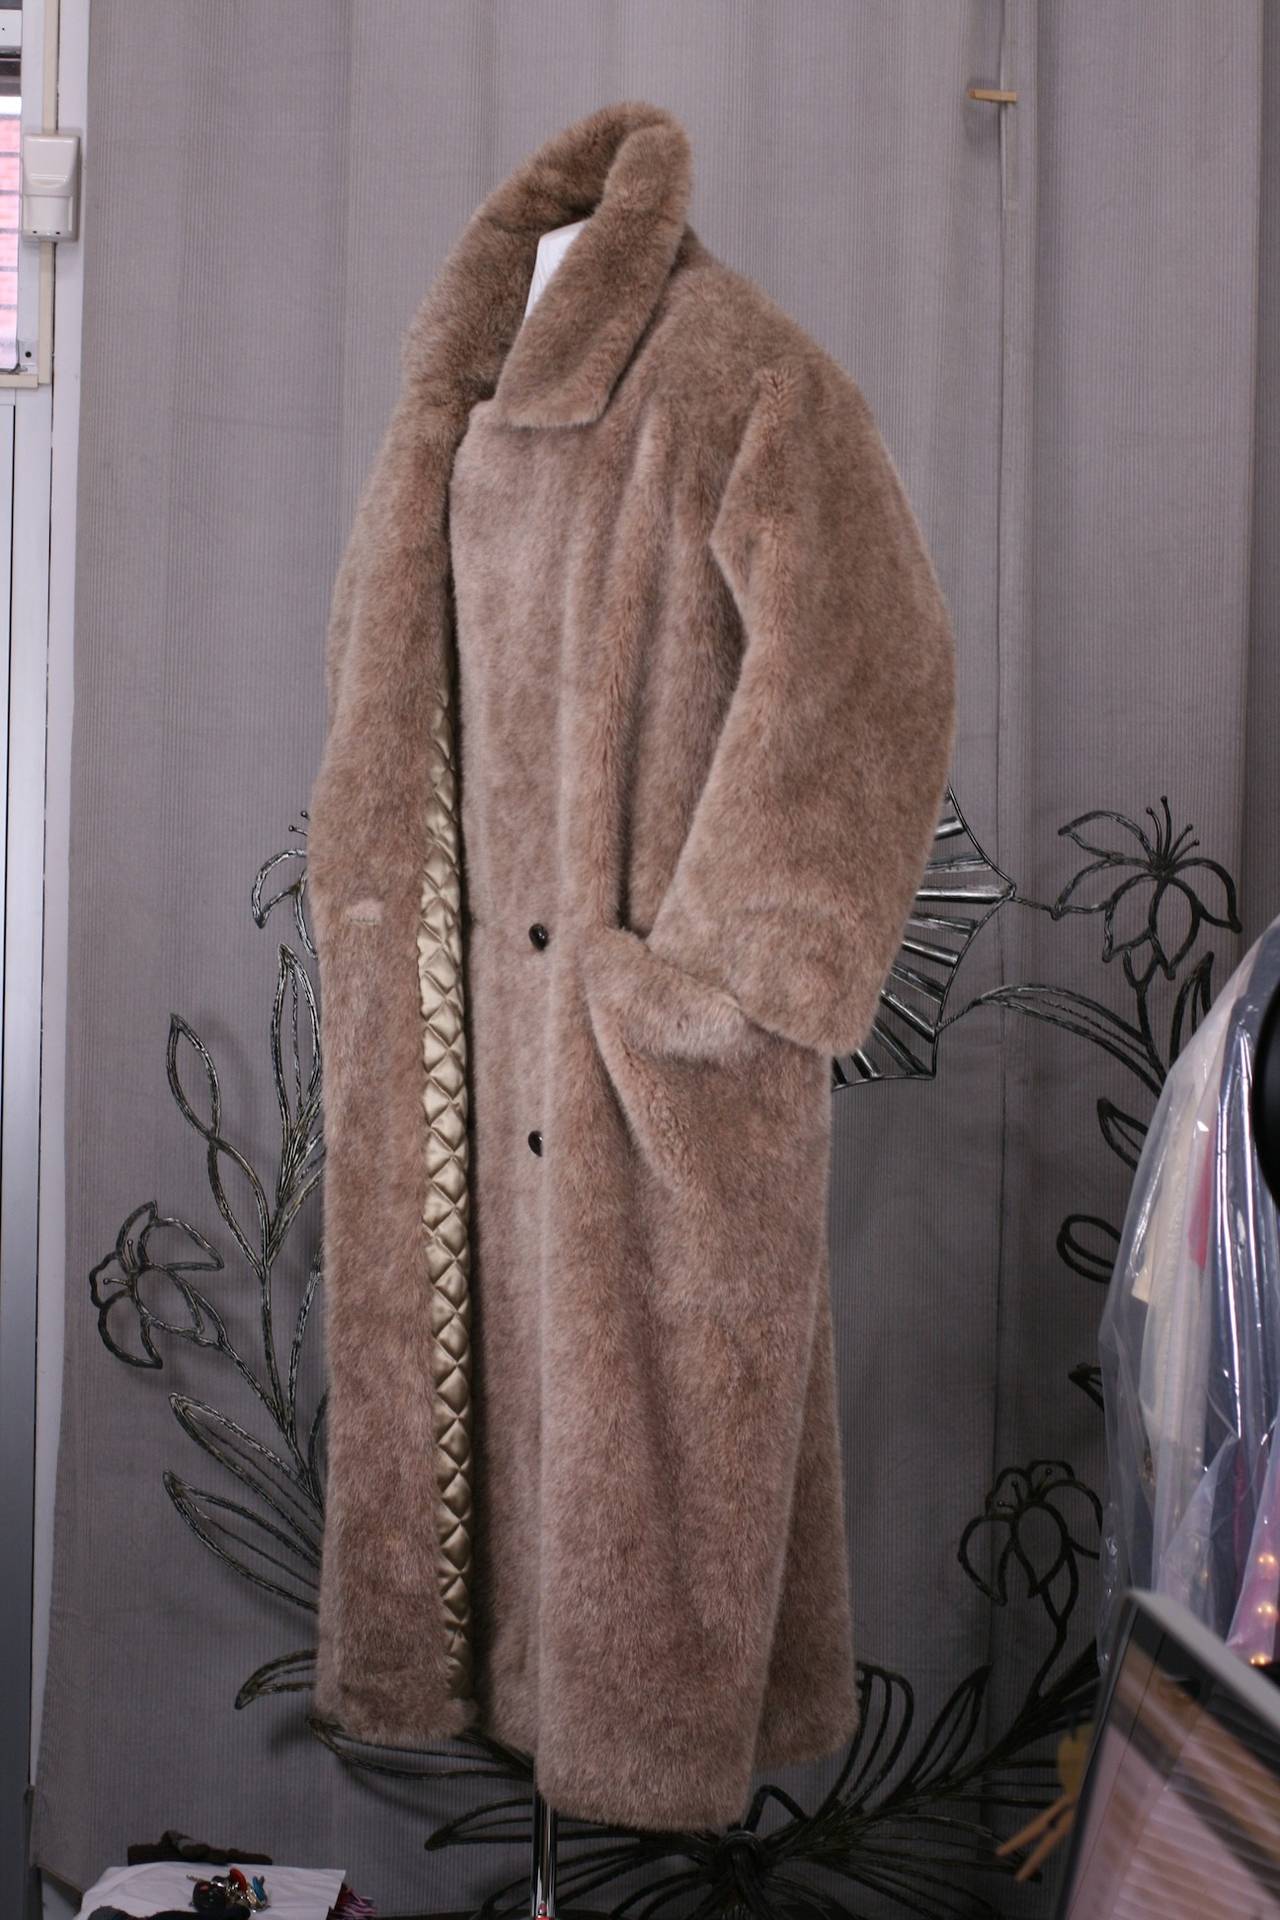 Insanely plush teddy bear overcoat by Anne Klein. This coat was a special order original sample and is unworn. The Anne Klein company was not known for their menswear, but, this coat keeps to their aesthetic of clean modernized American inflected